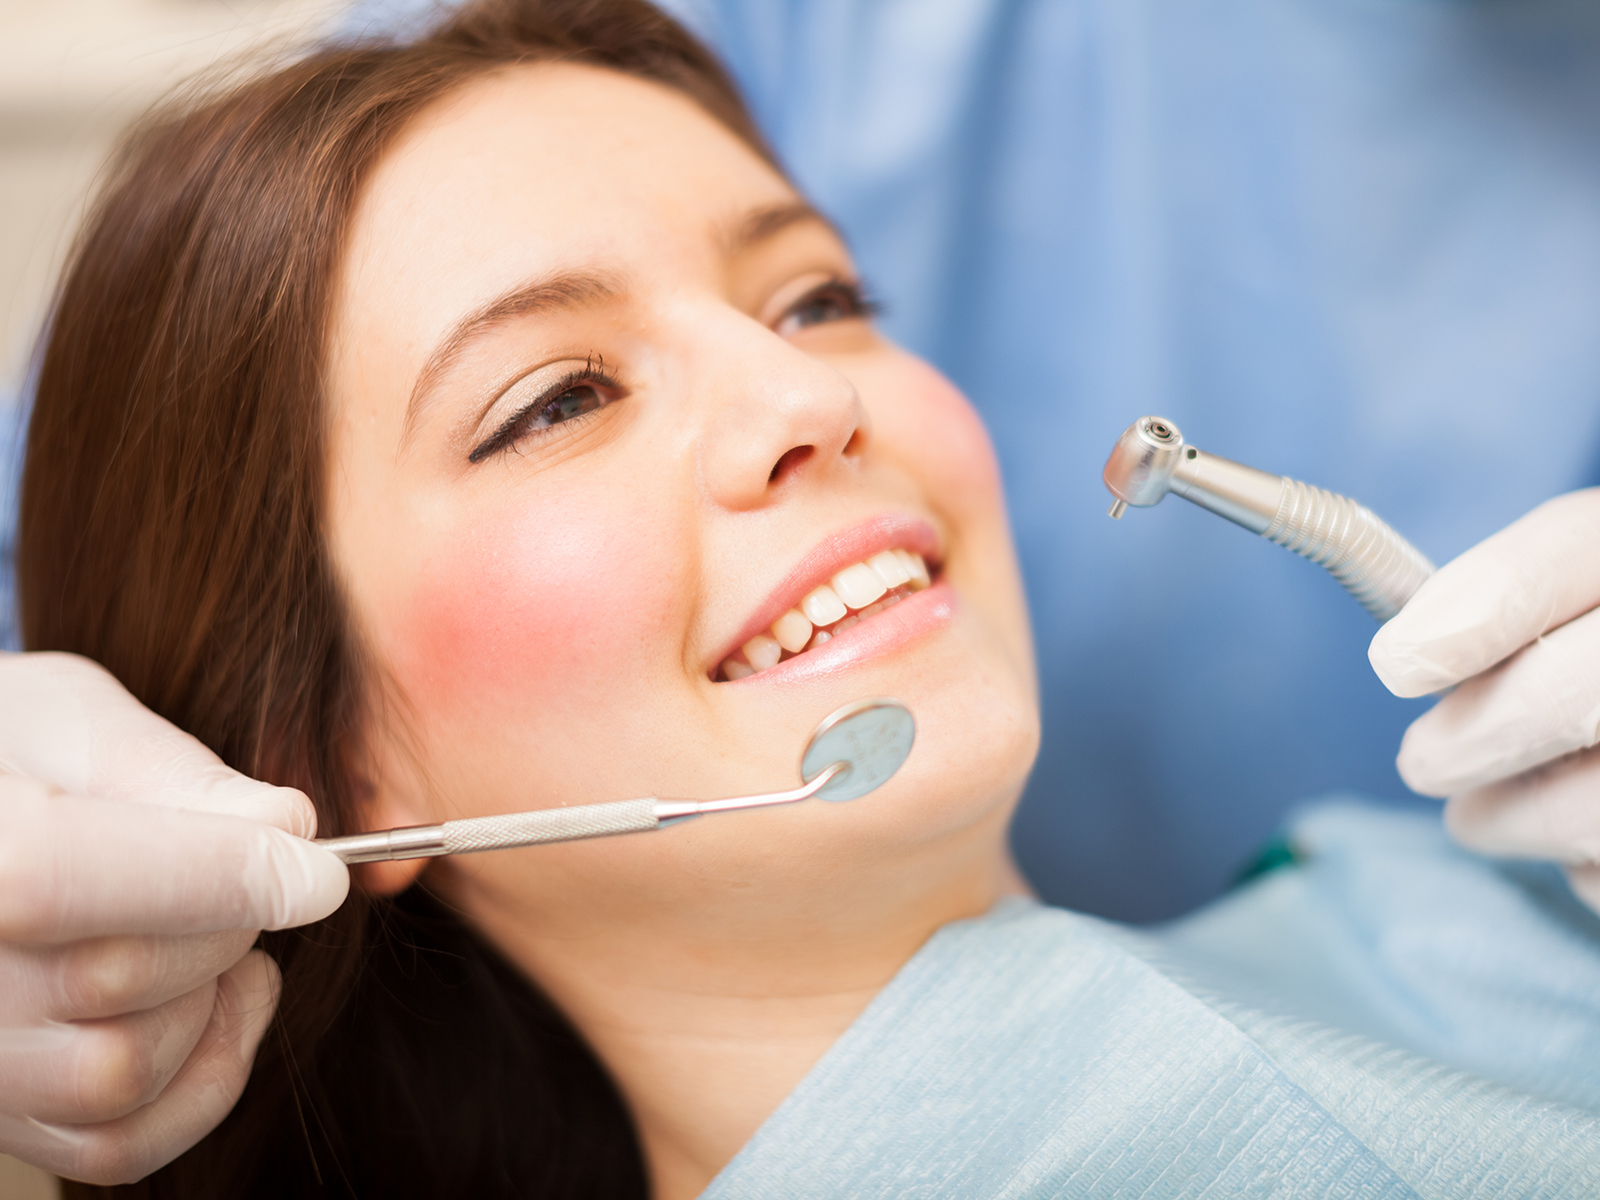 What are the stages of a root canal?